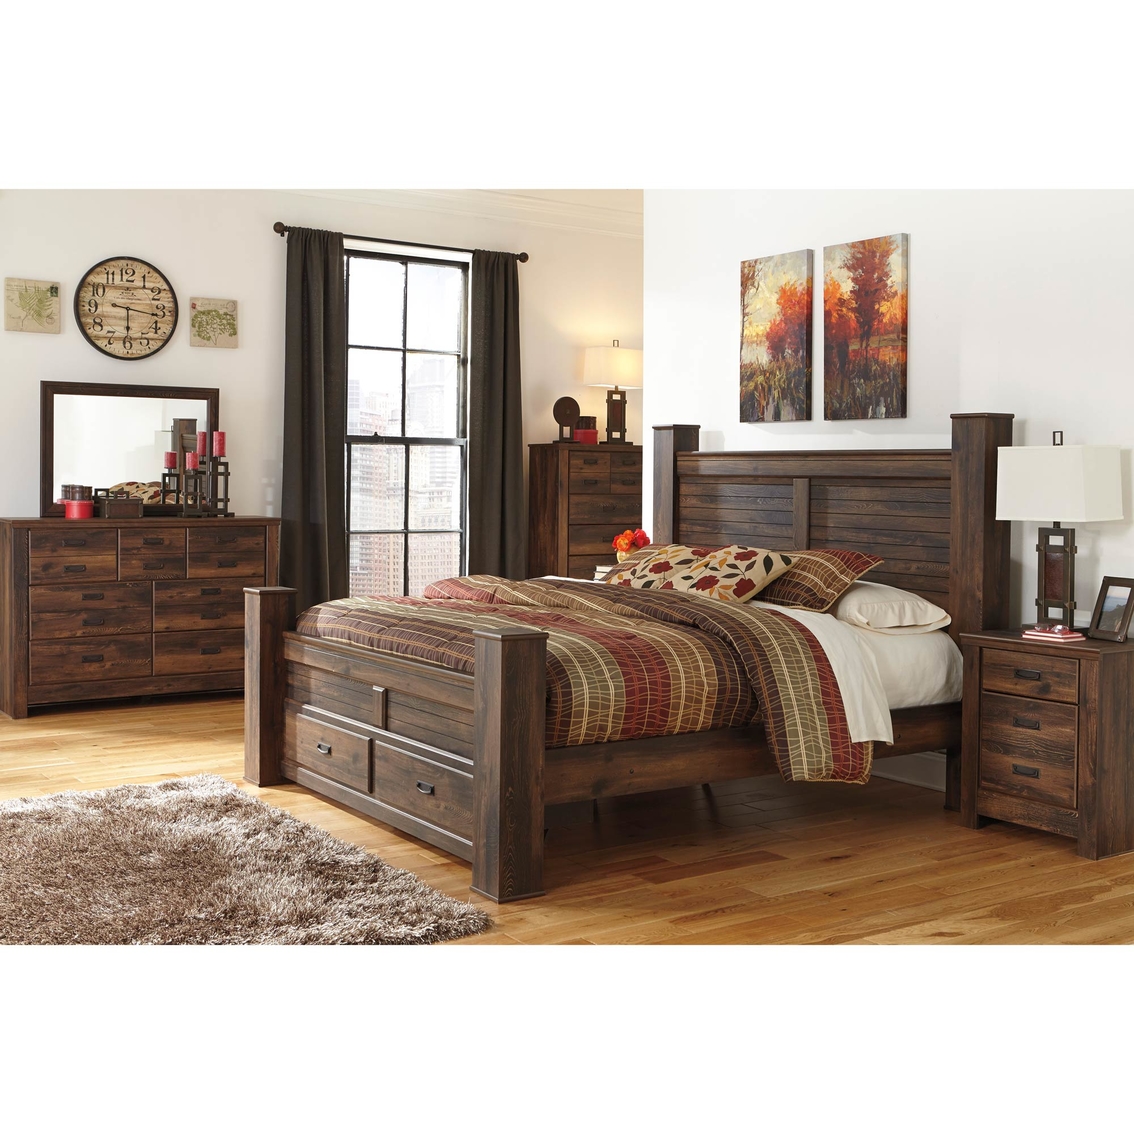 Ashley Quinden Queen Poster Bed with Storage - Image 2 of 2